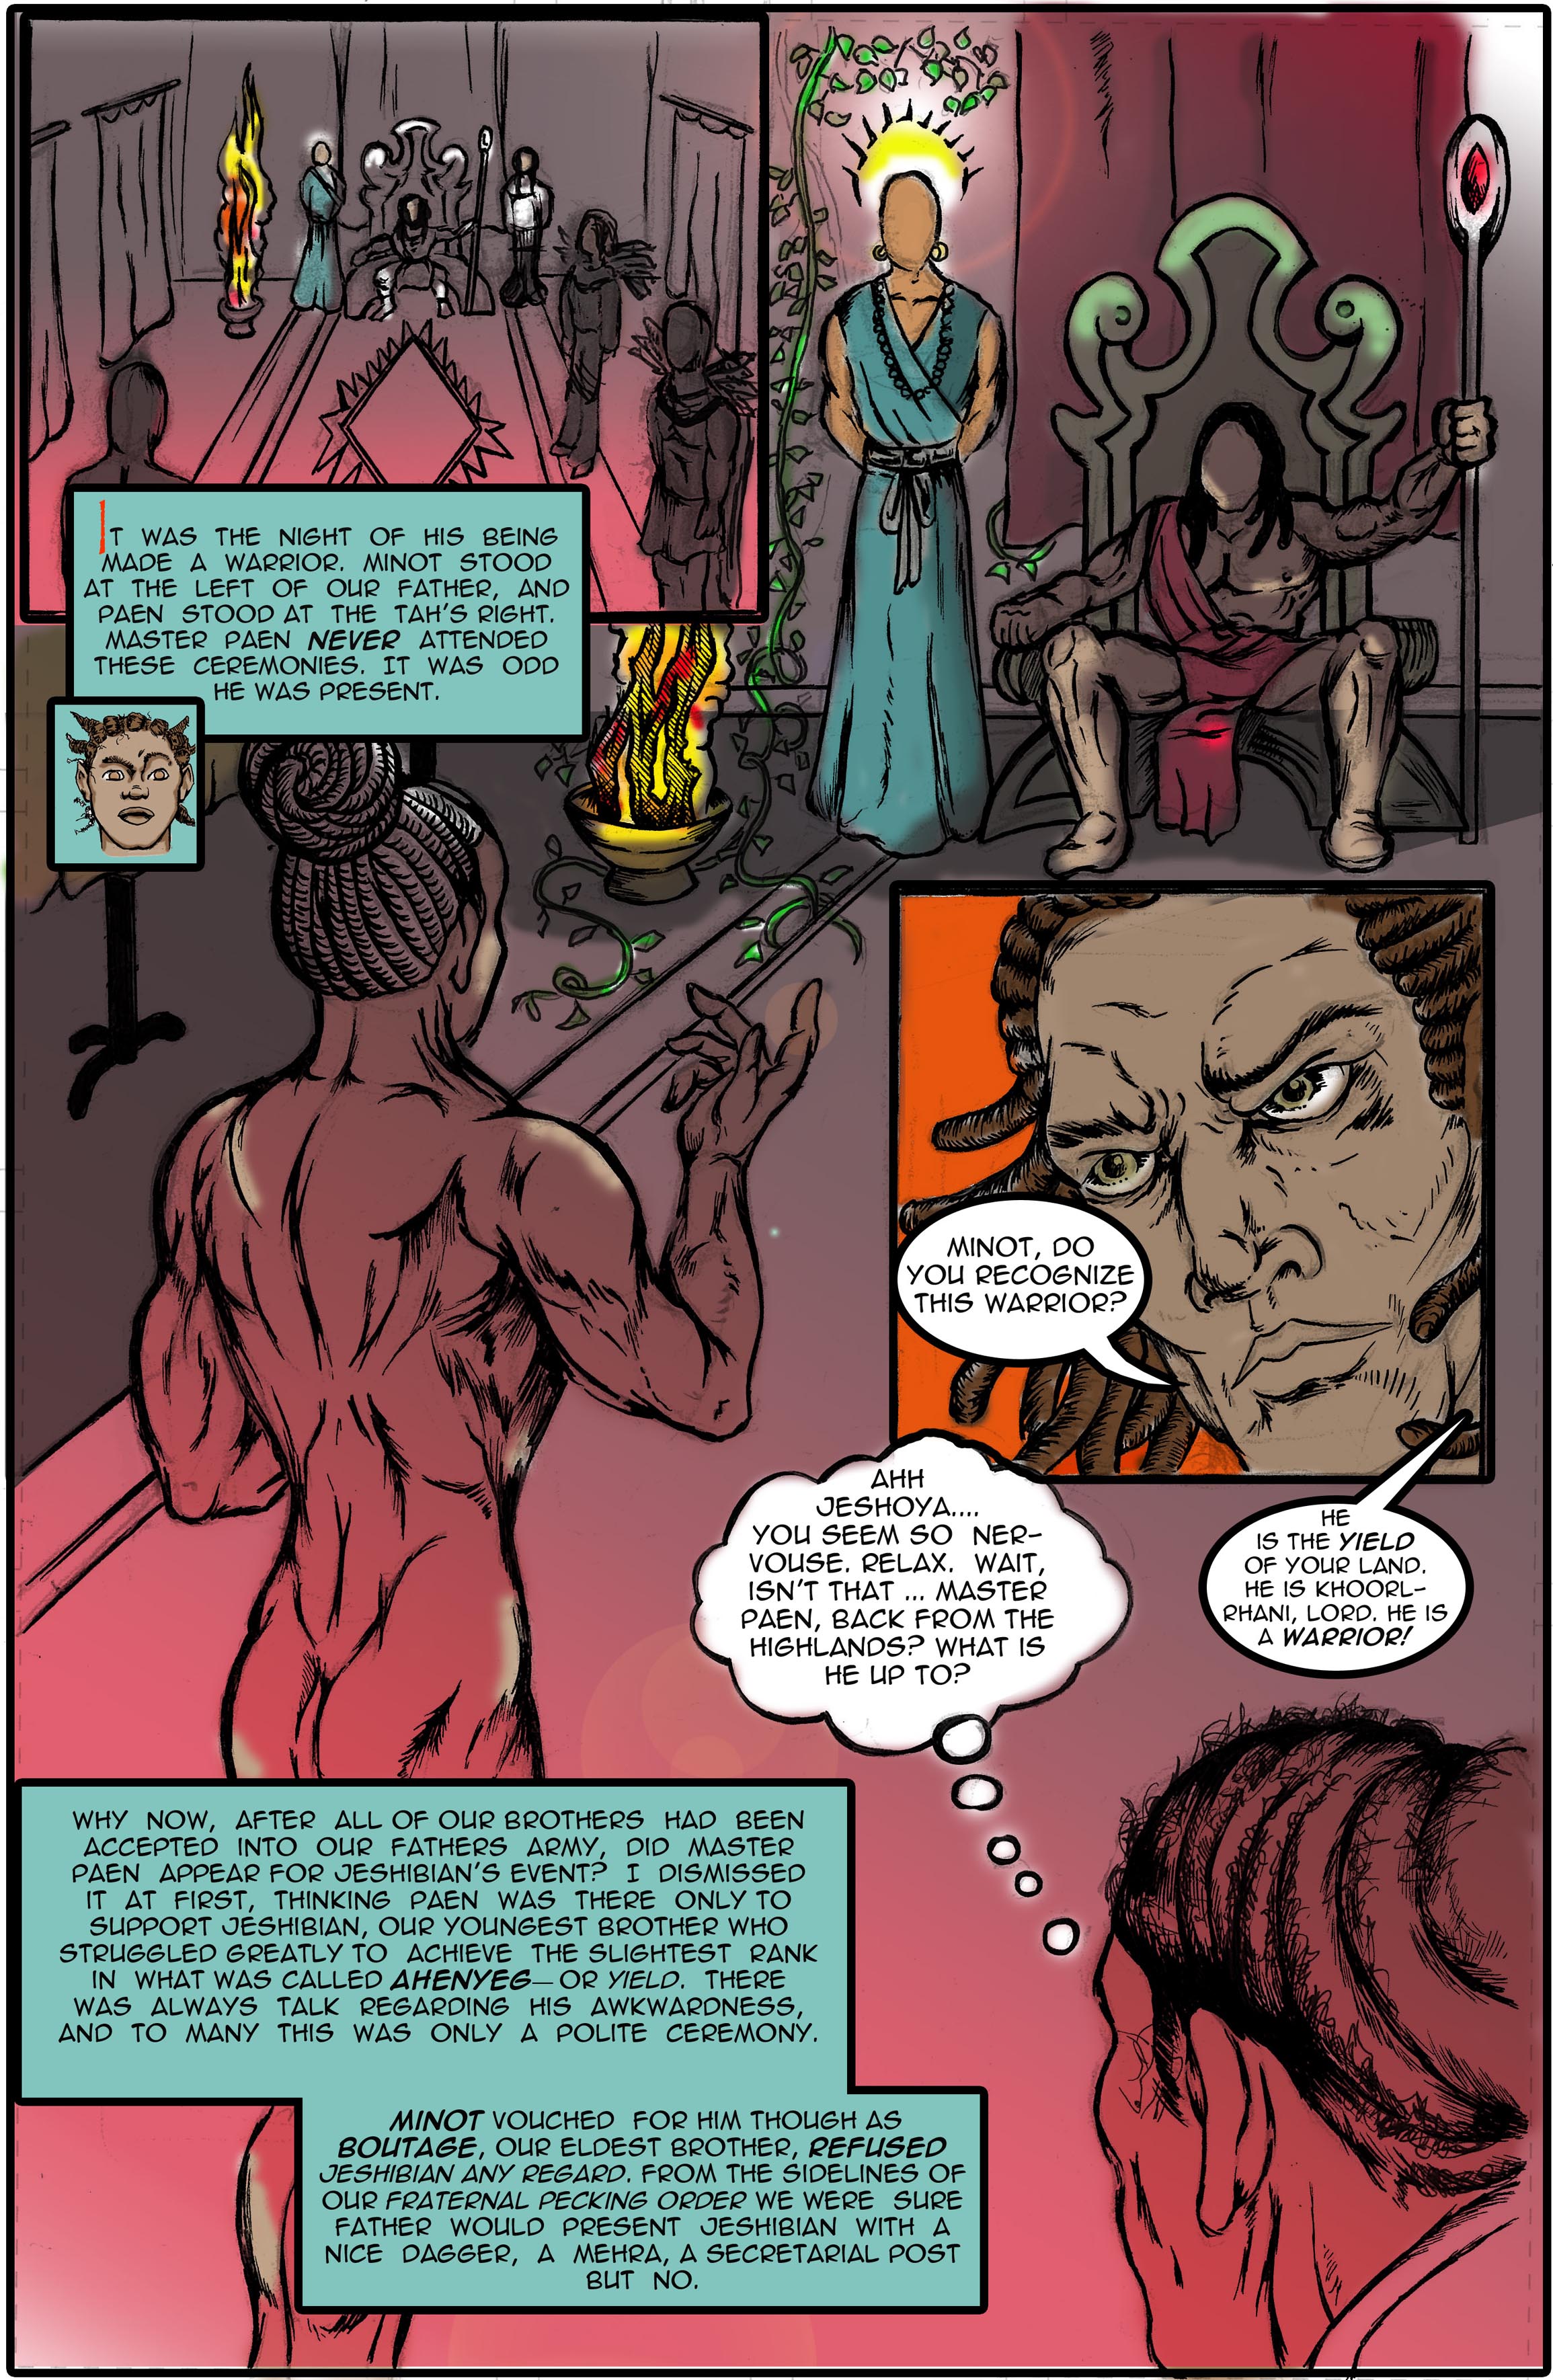 Dreamers of the Great One Land (page 12)